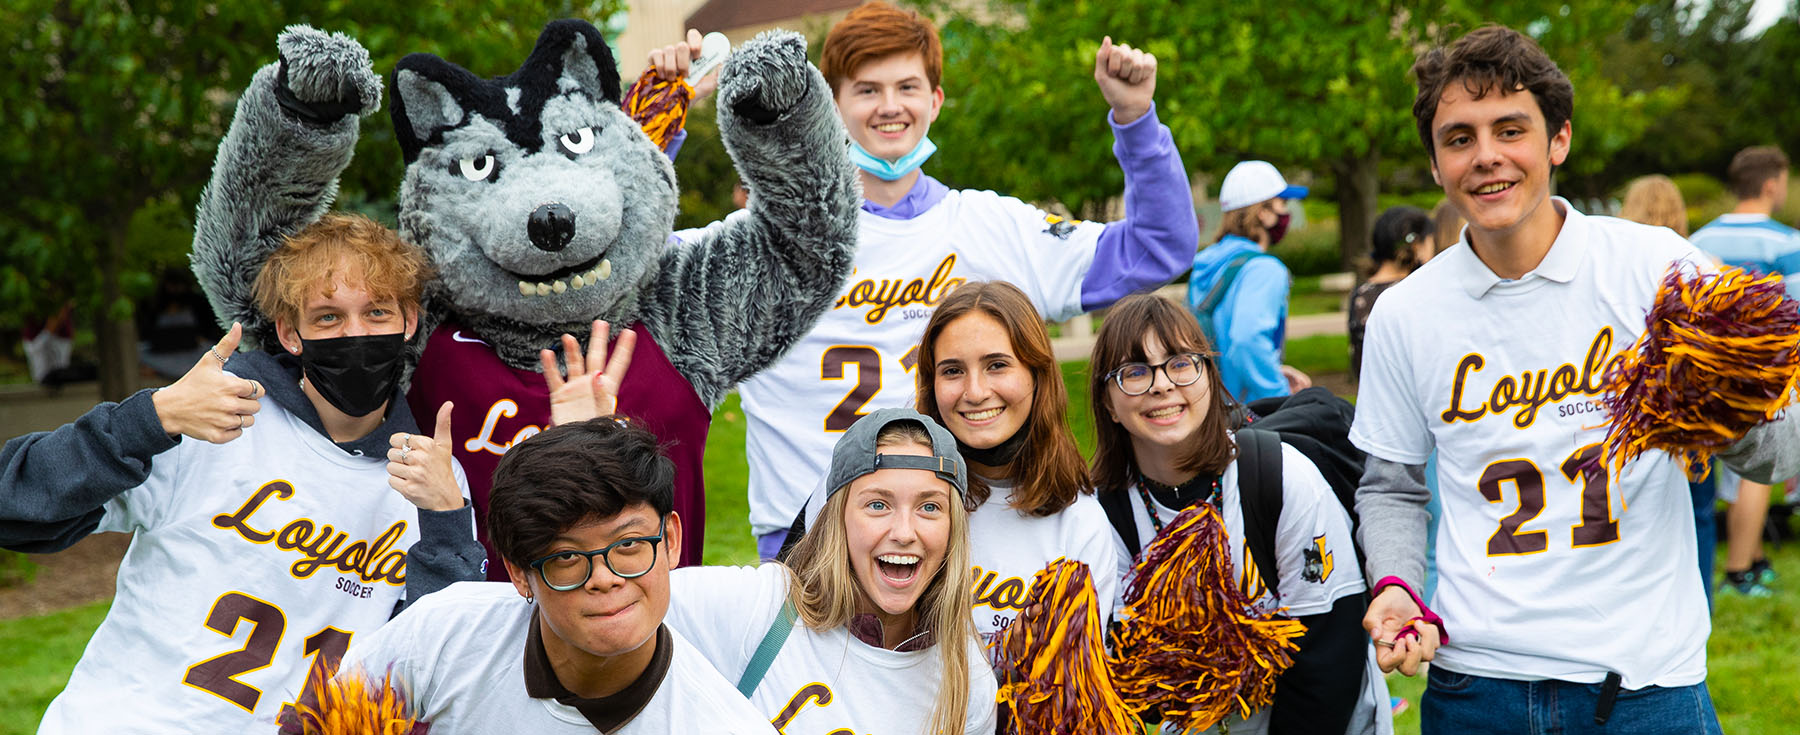 LUC students showing their school spirt while standing next to Lu Wolf